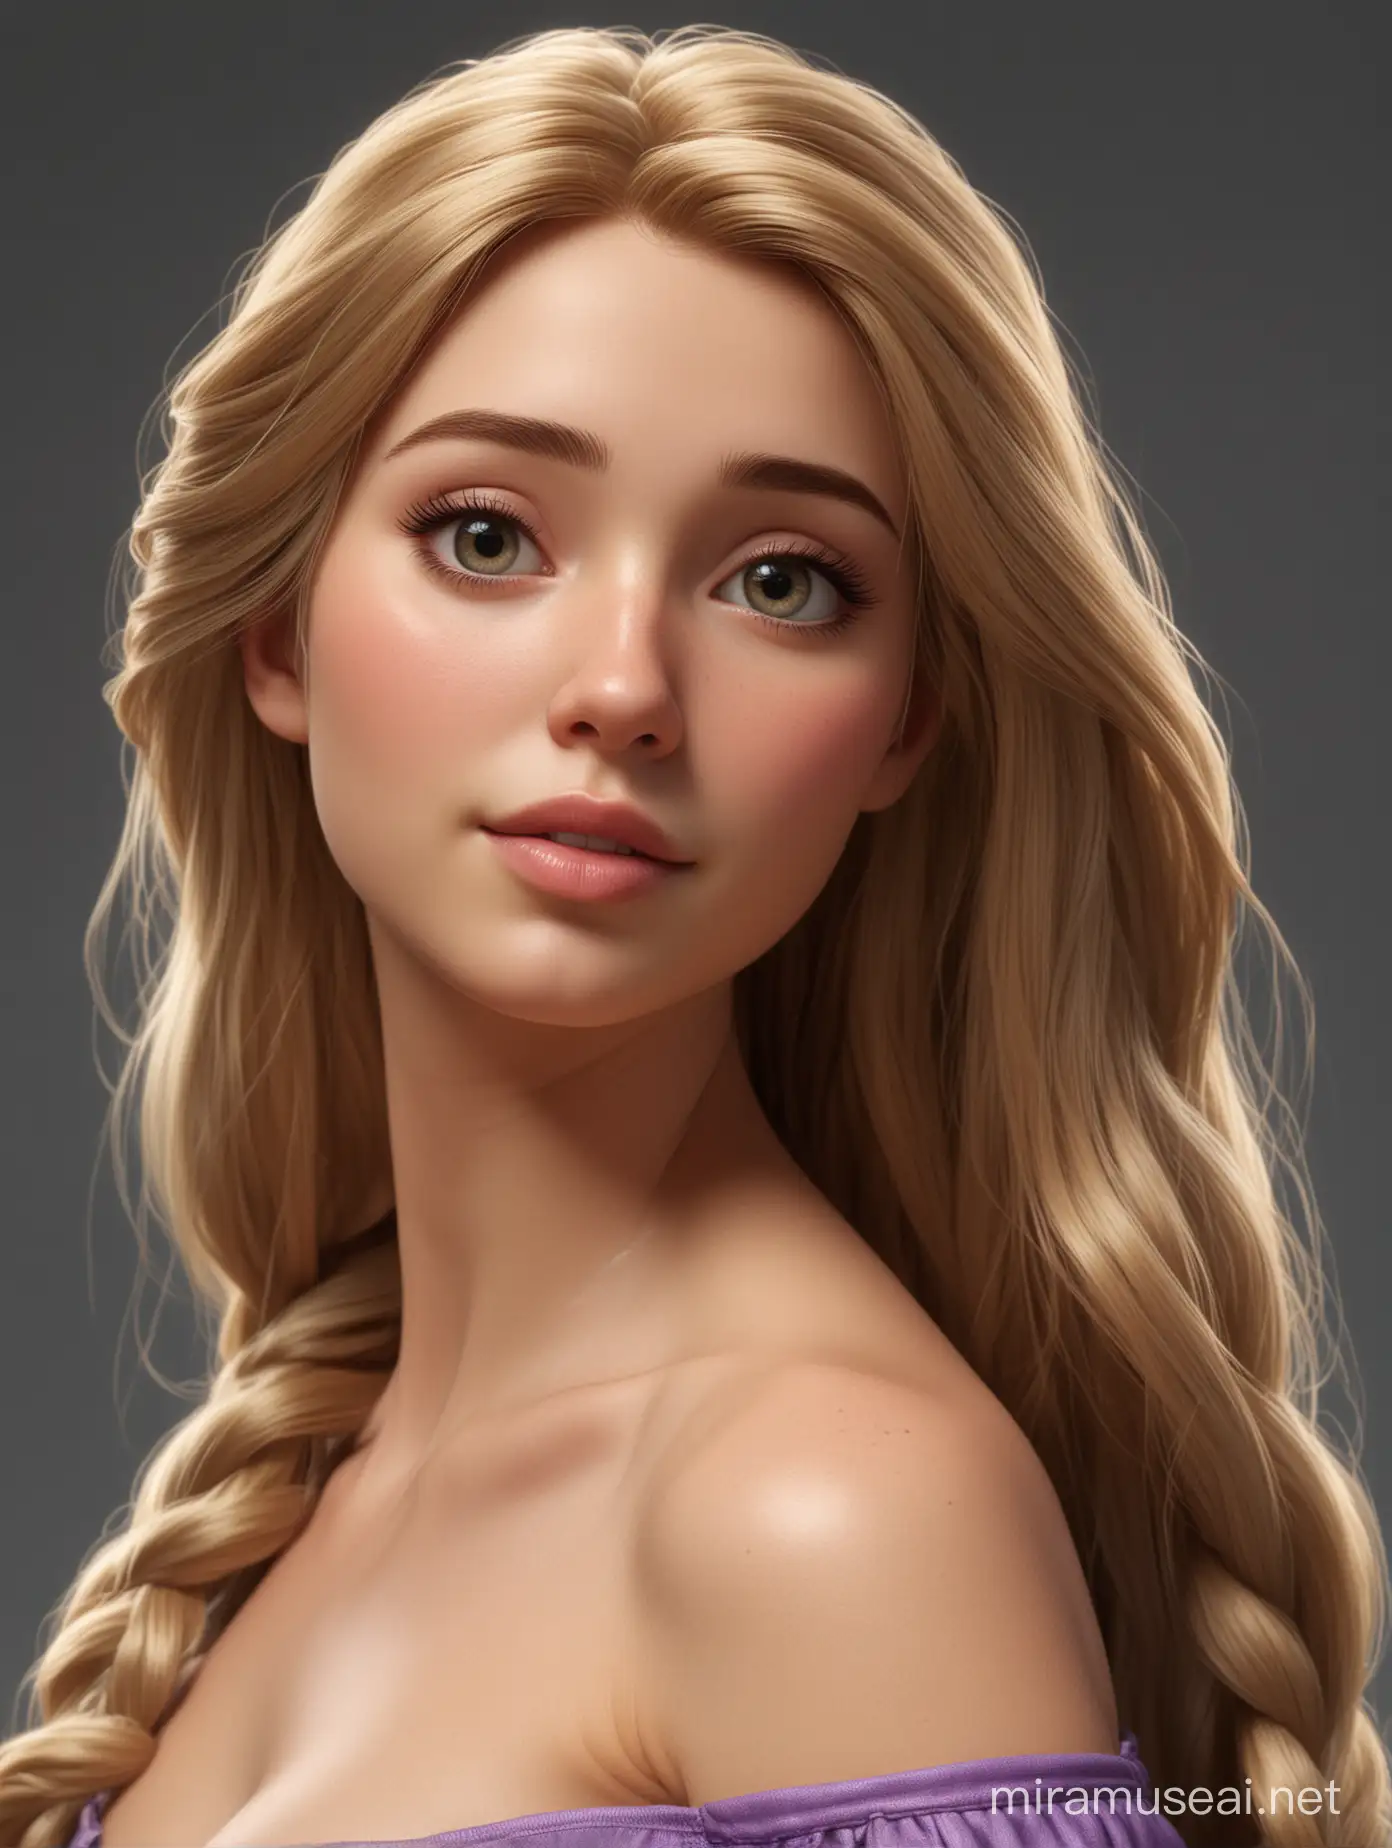 Nude Rapunzel Portrait in Realistic HighQuality Photo Style